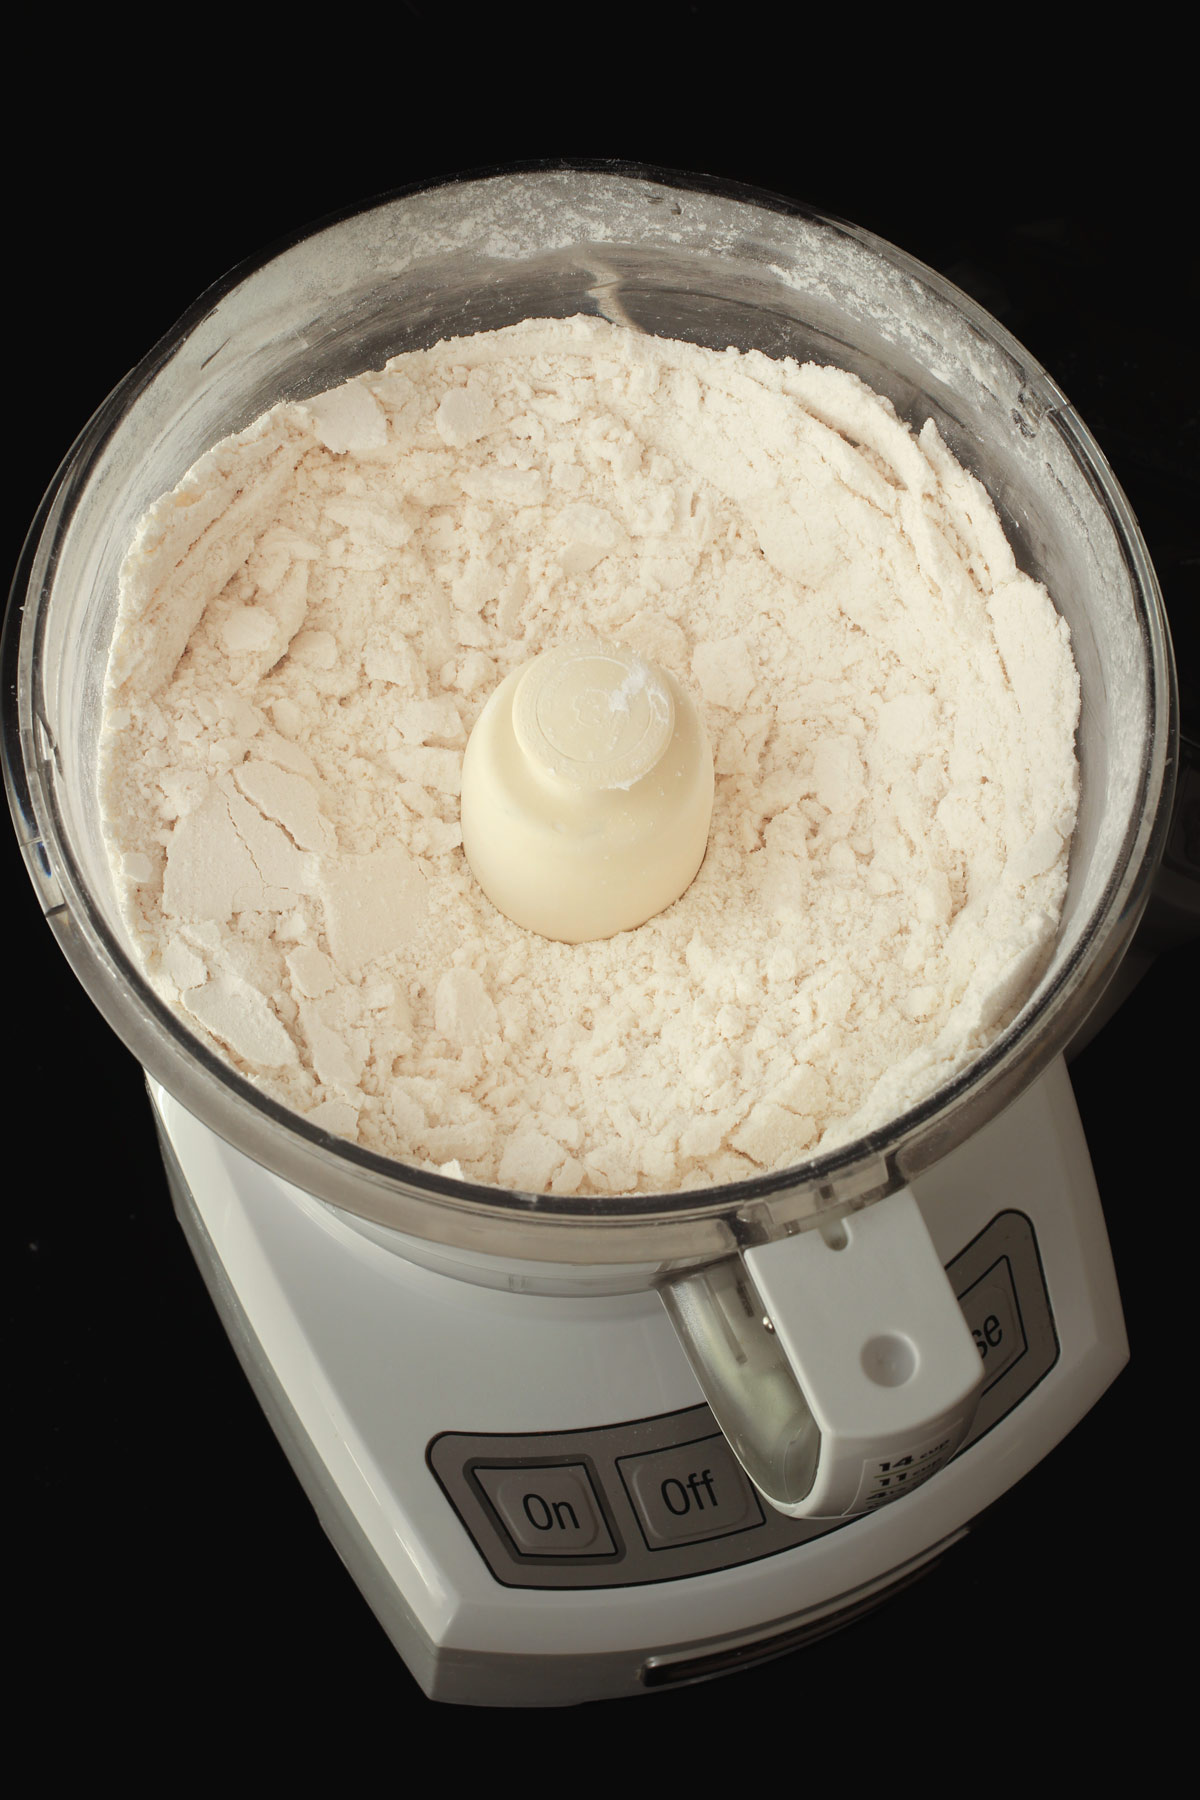 butter and flour crumbs in food processor bowl.